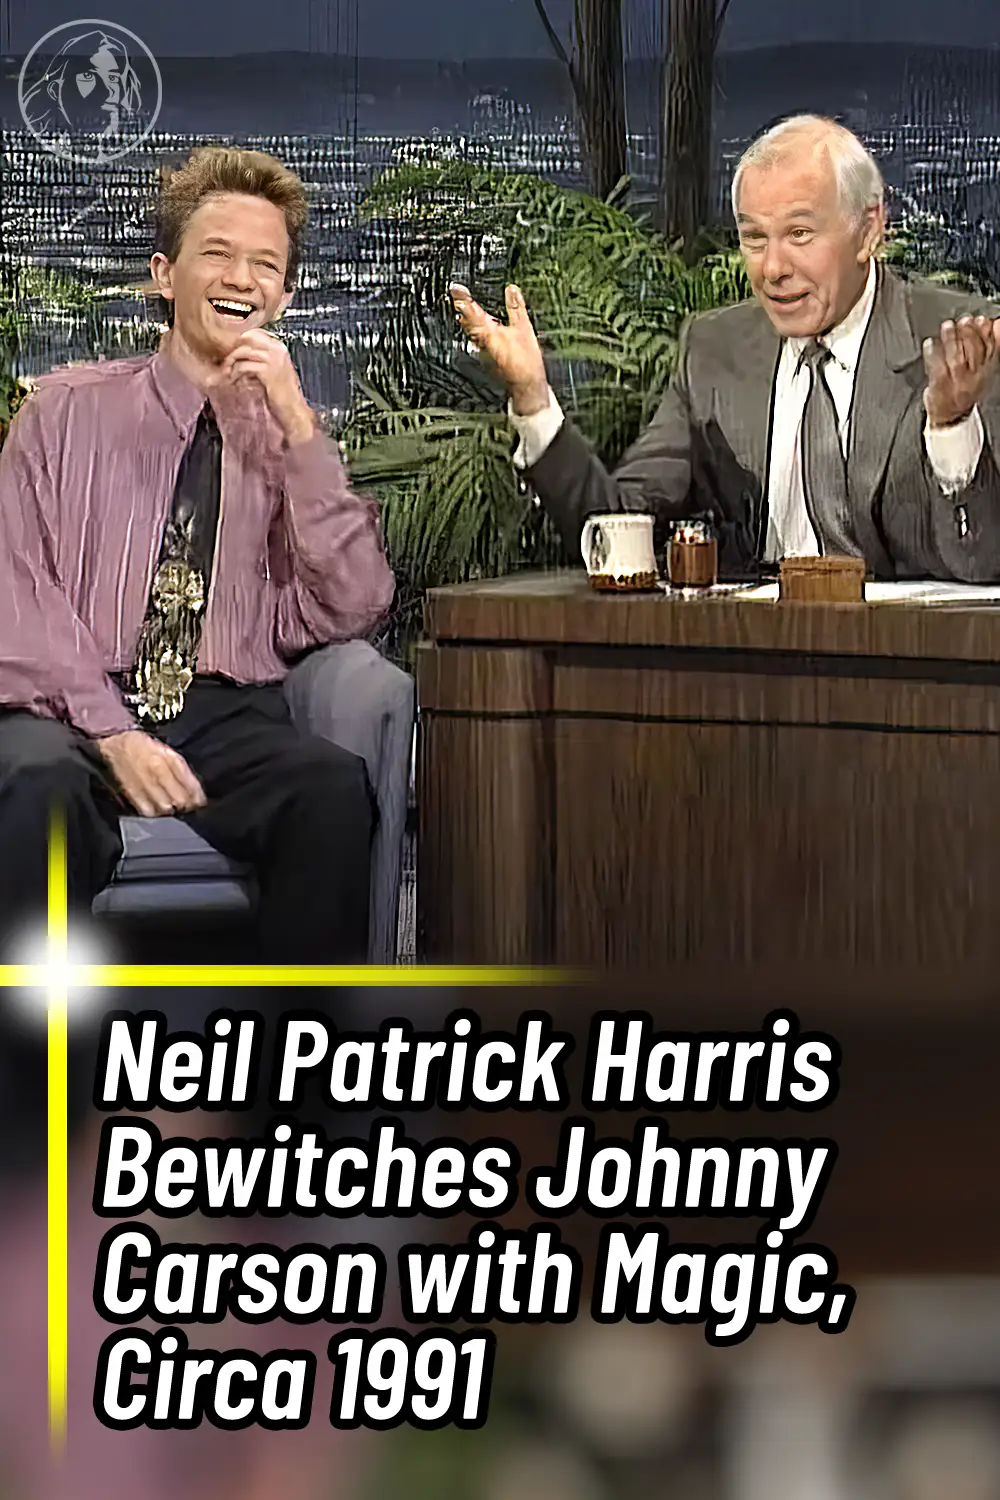 Neil Patrick Harris Bewitches Johnny Carson with Magic, Circa 1991